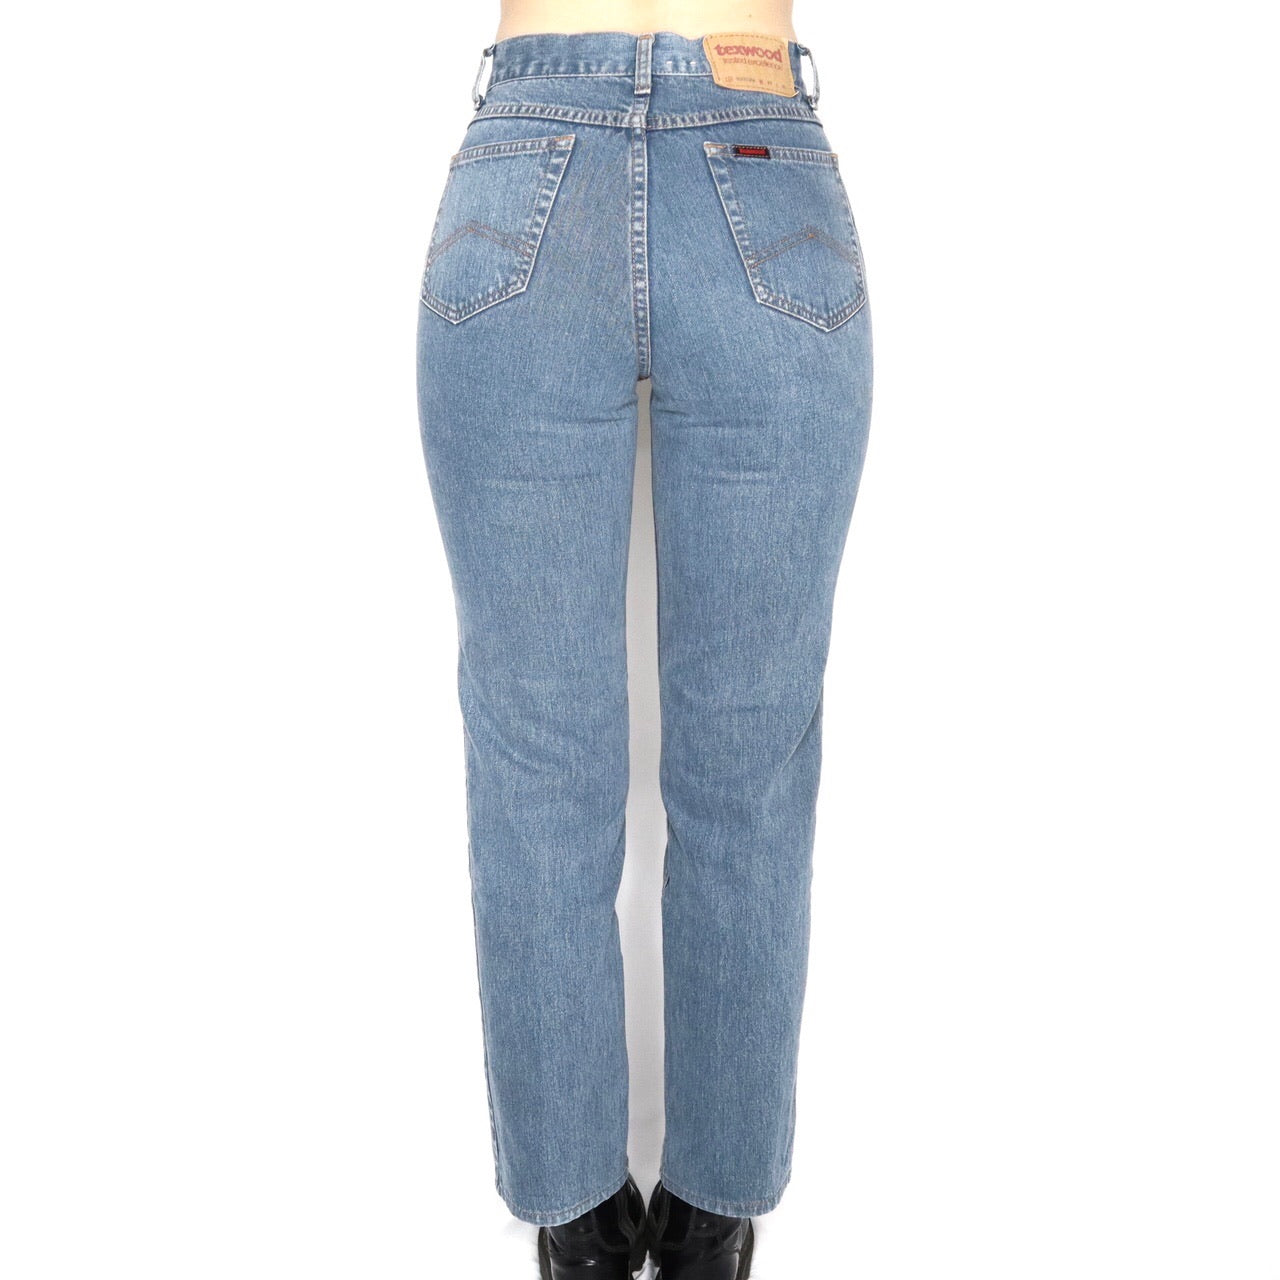 Vintage 80s High Waisted Jeans